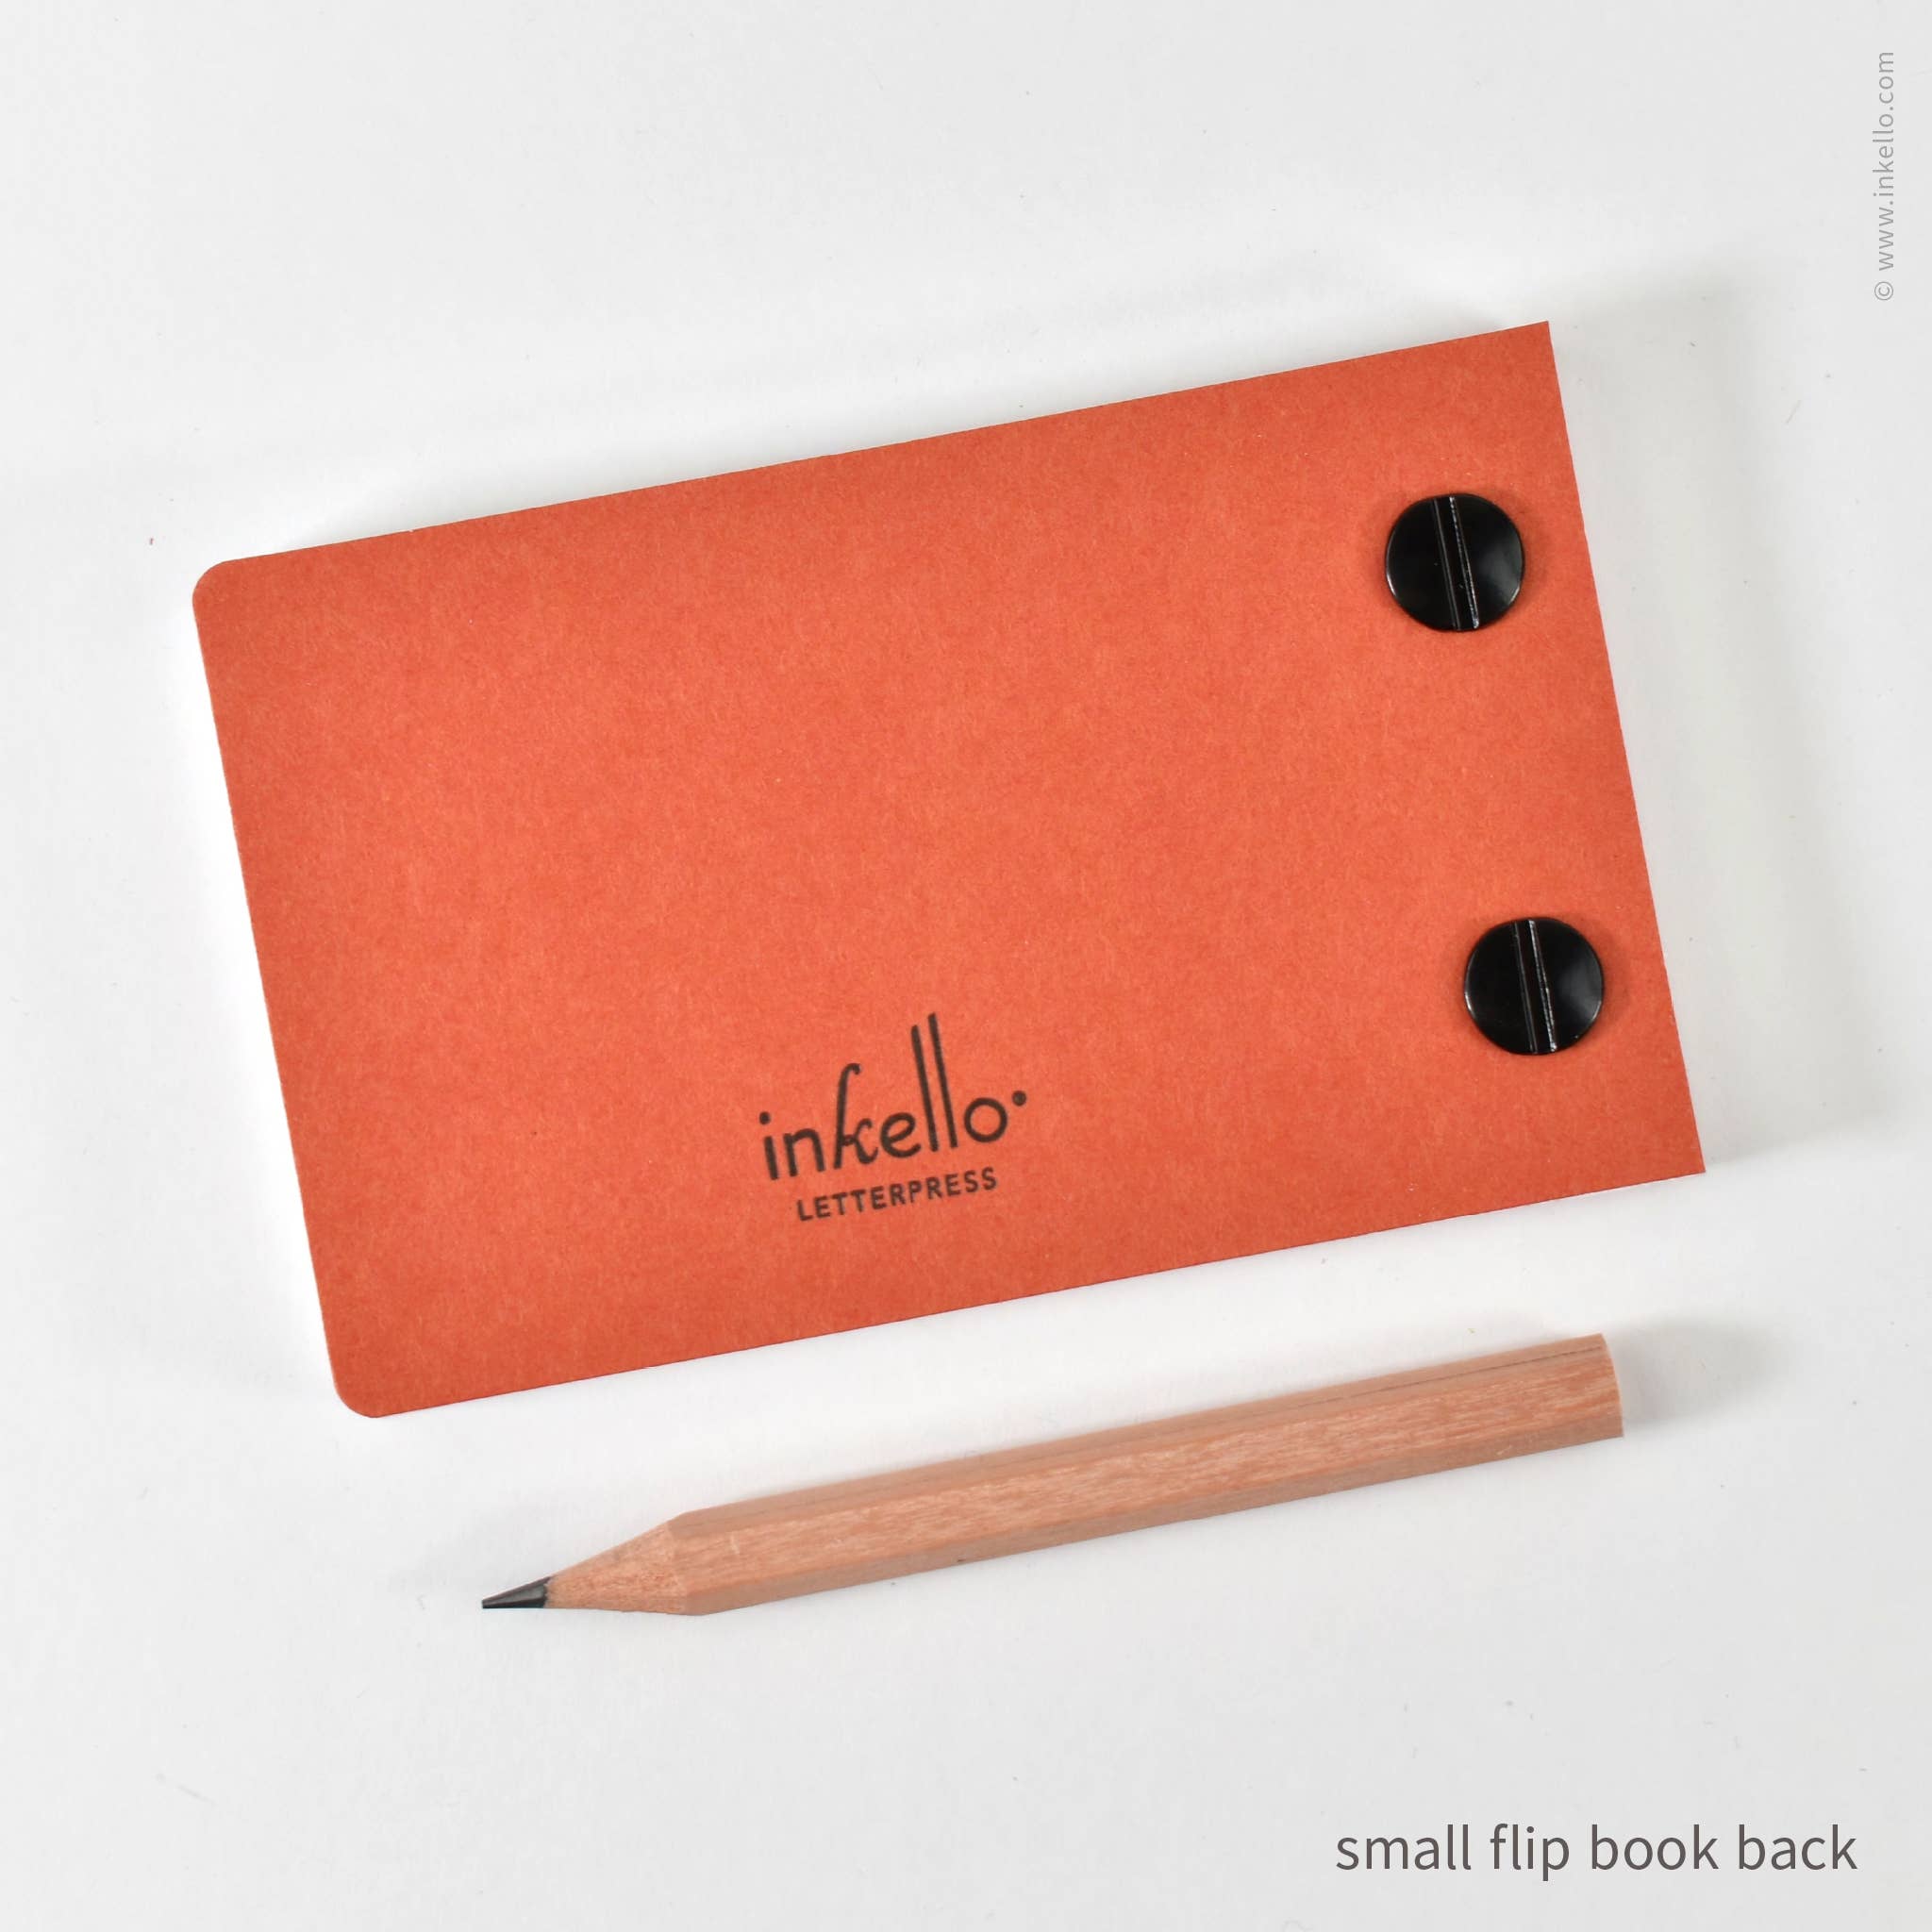 Tomato Red Draw-Your-Own Flip Book + Pencil